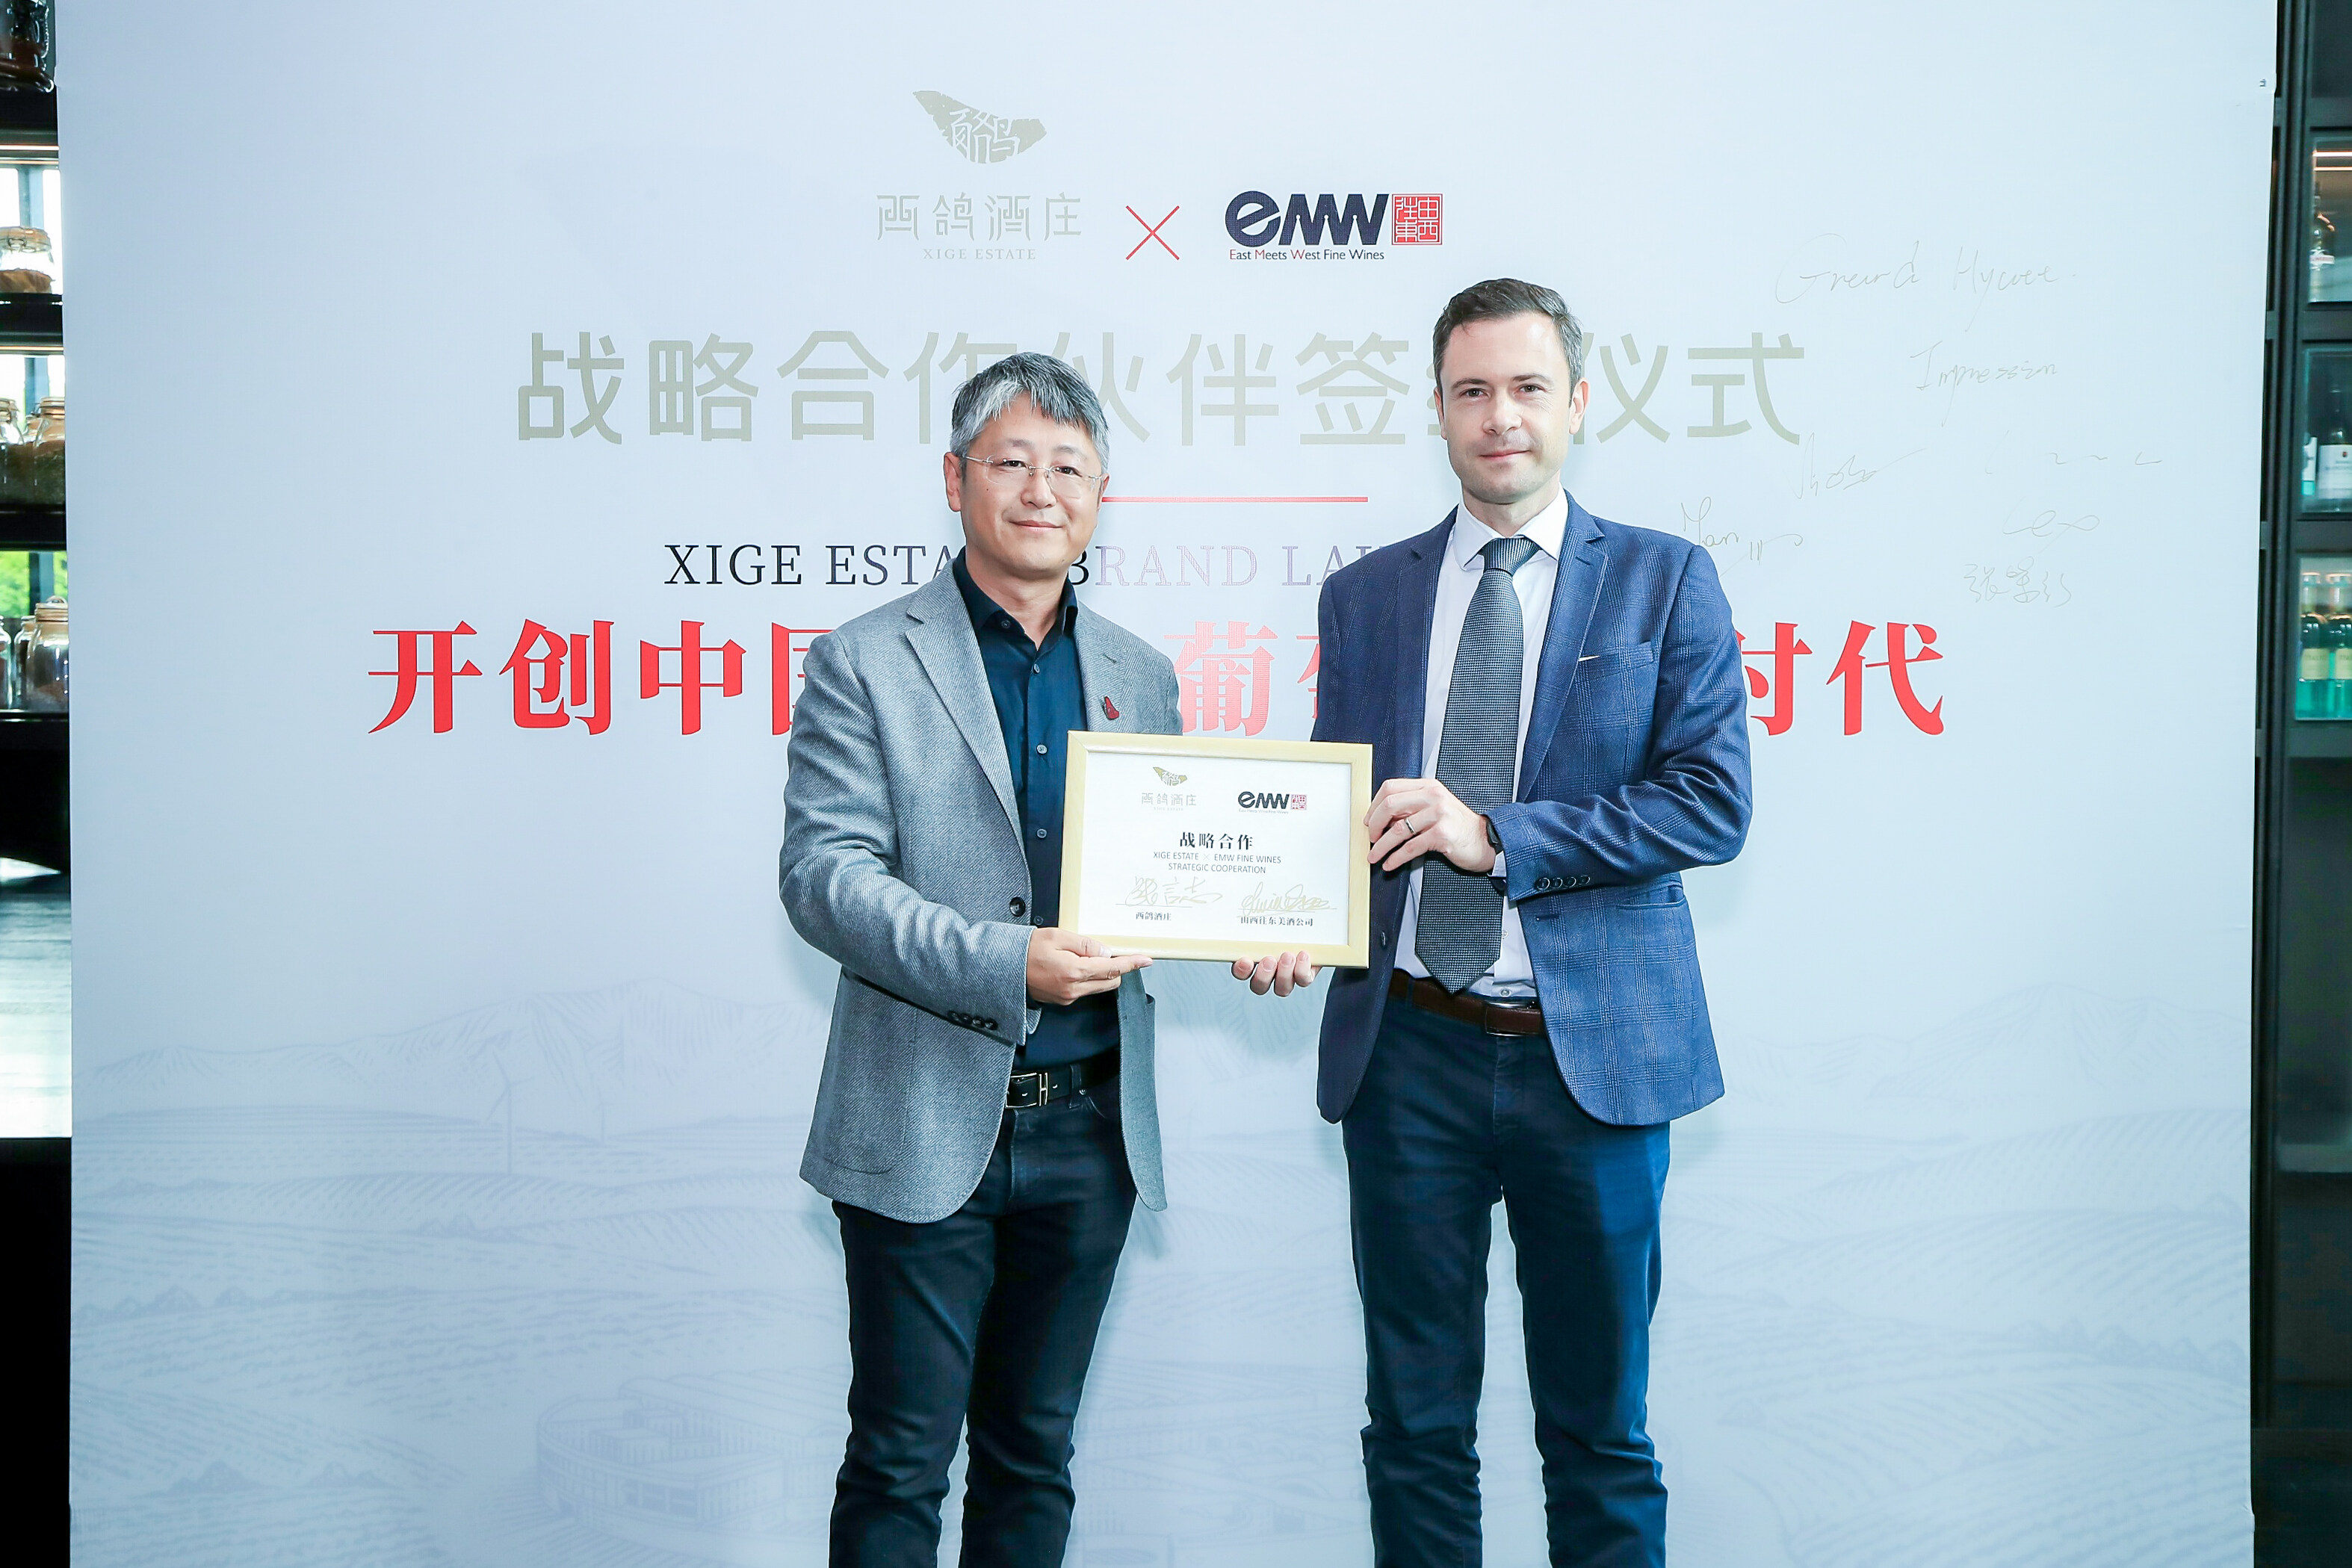 EMW丨and Xige team up to usher in a new era of Chinese fine wines